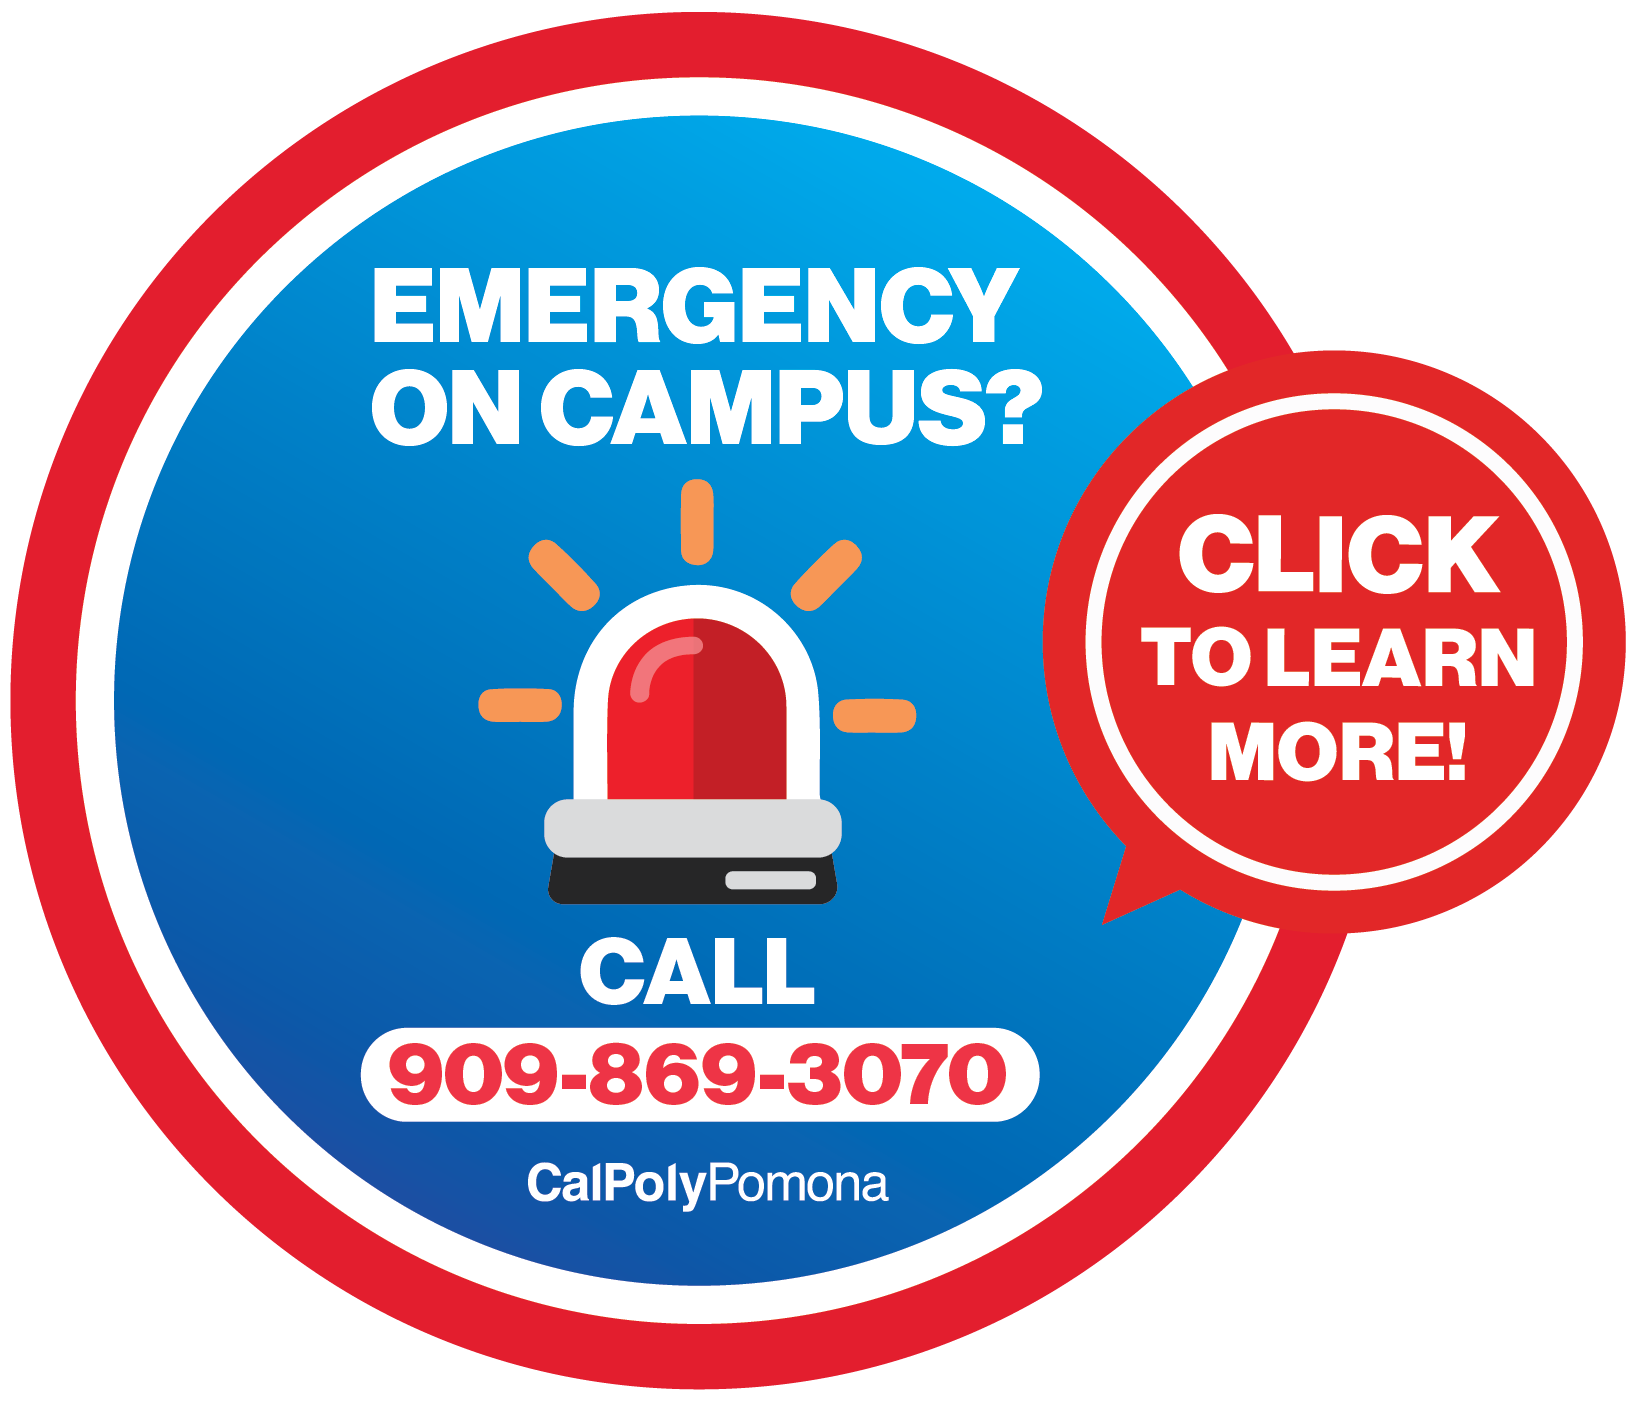 Emergency on Campus? Call 909-869-3070.